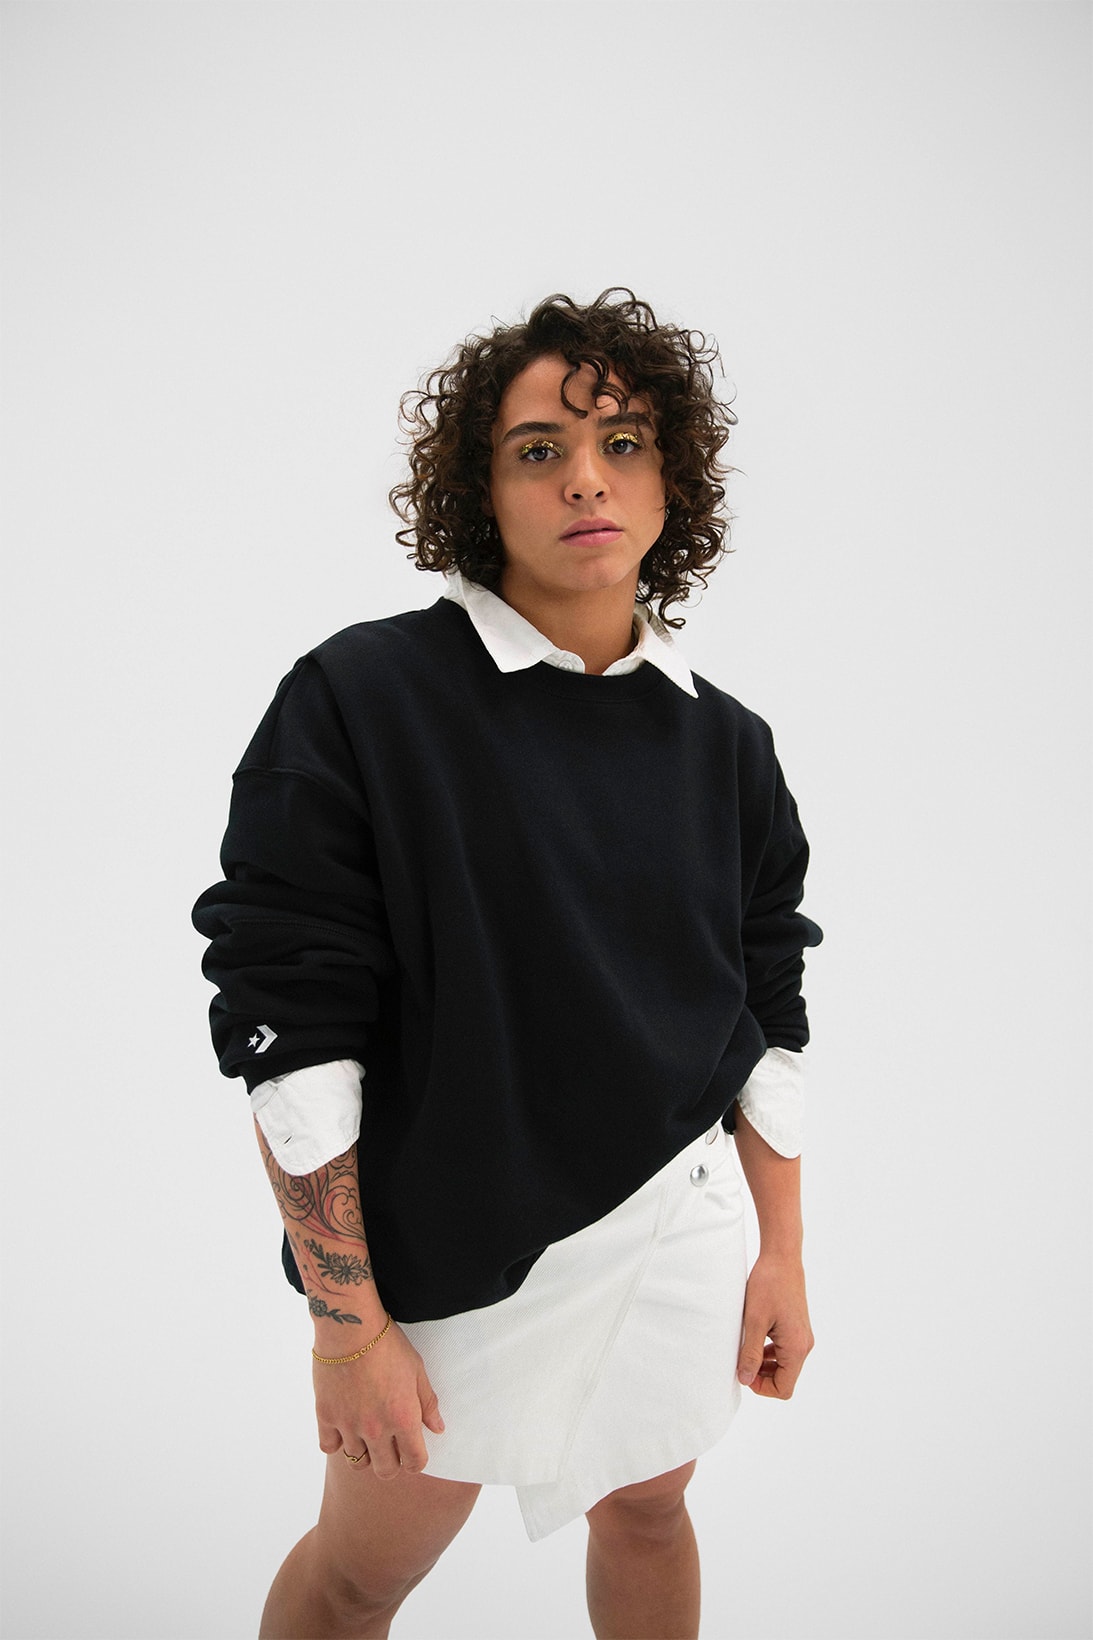 converse shapes genderless apparel collection hoodies crew neck sweaters lookbook